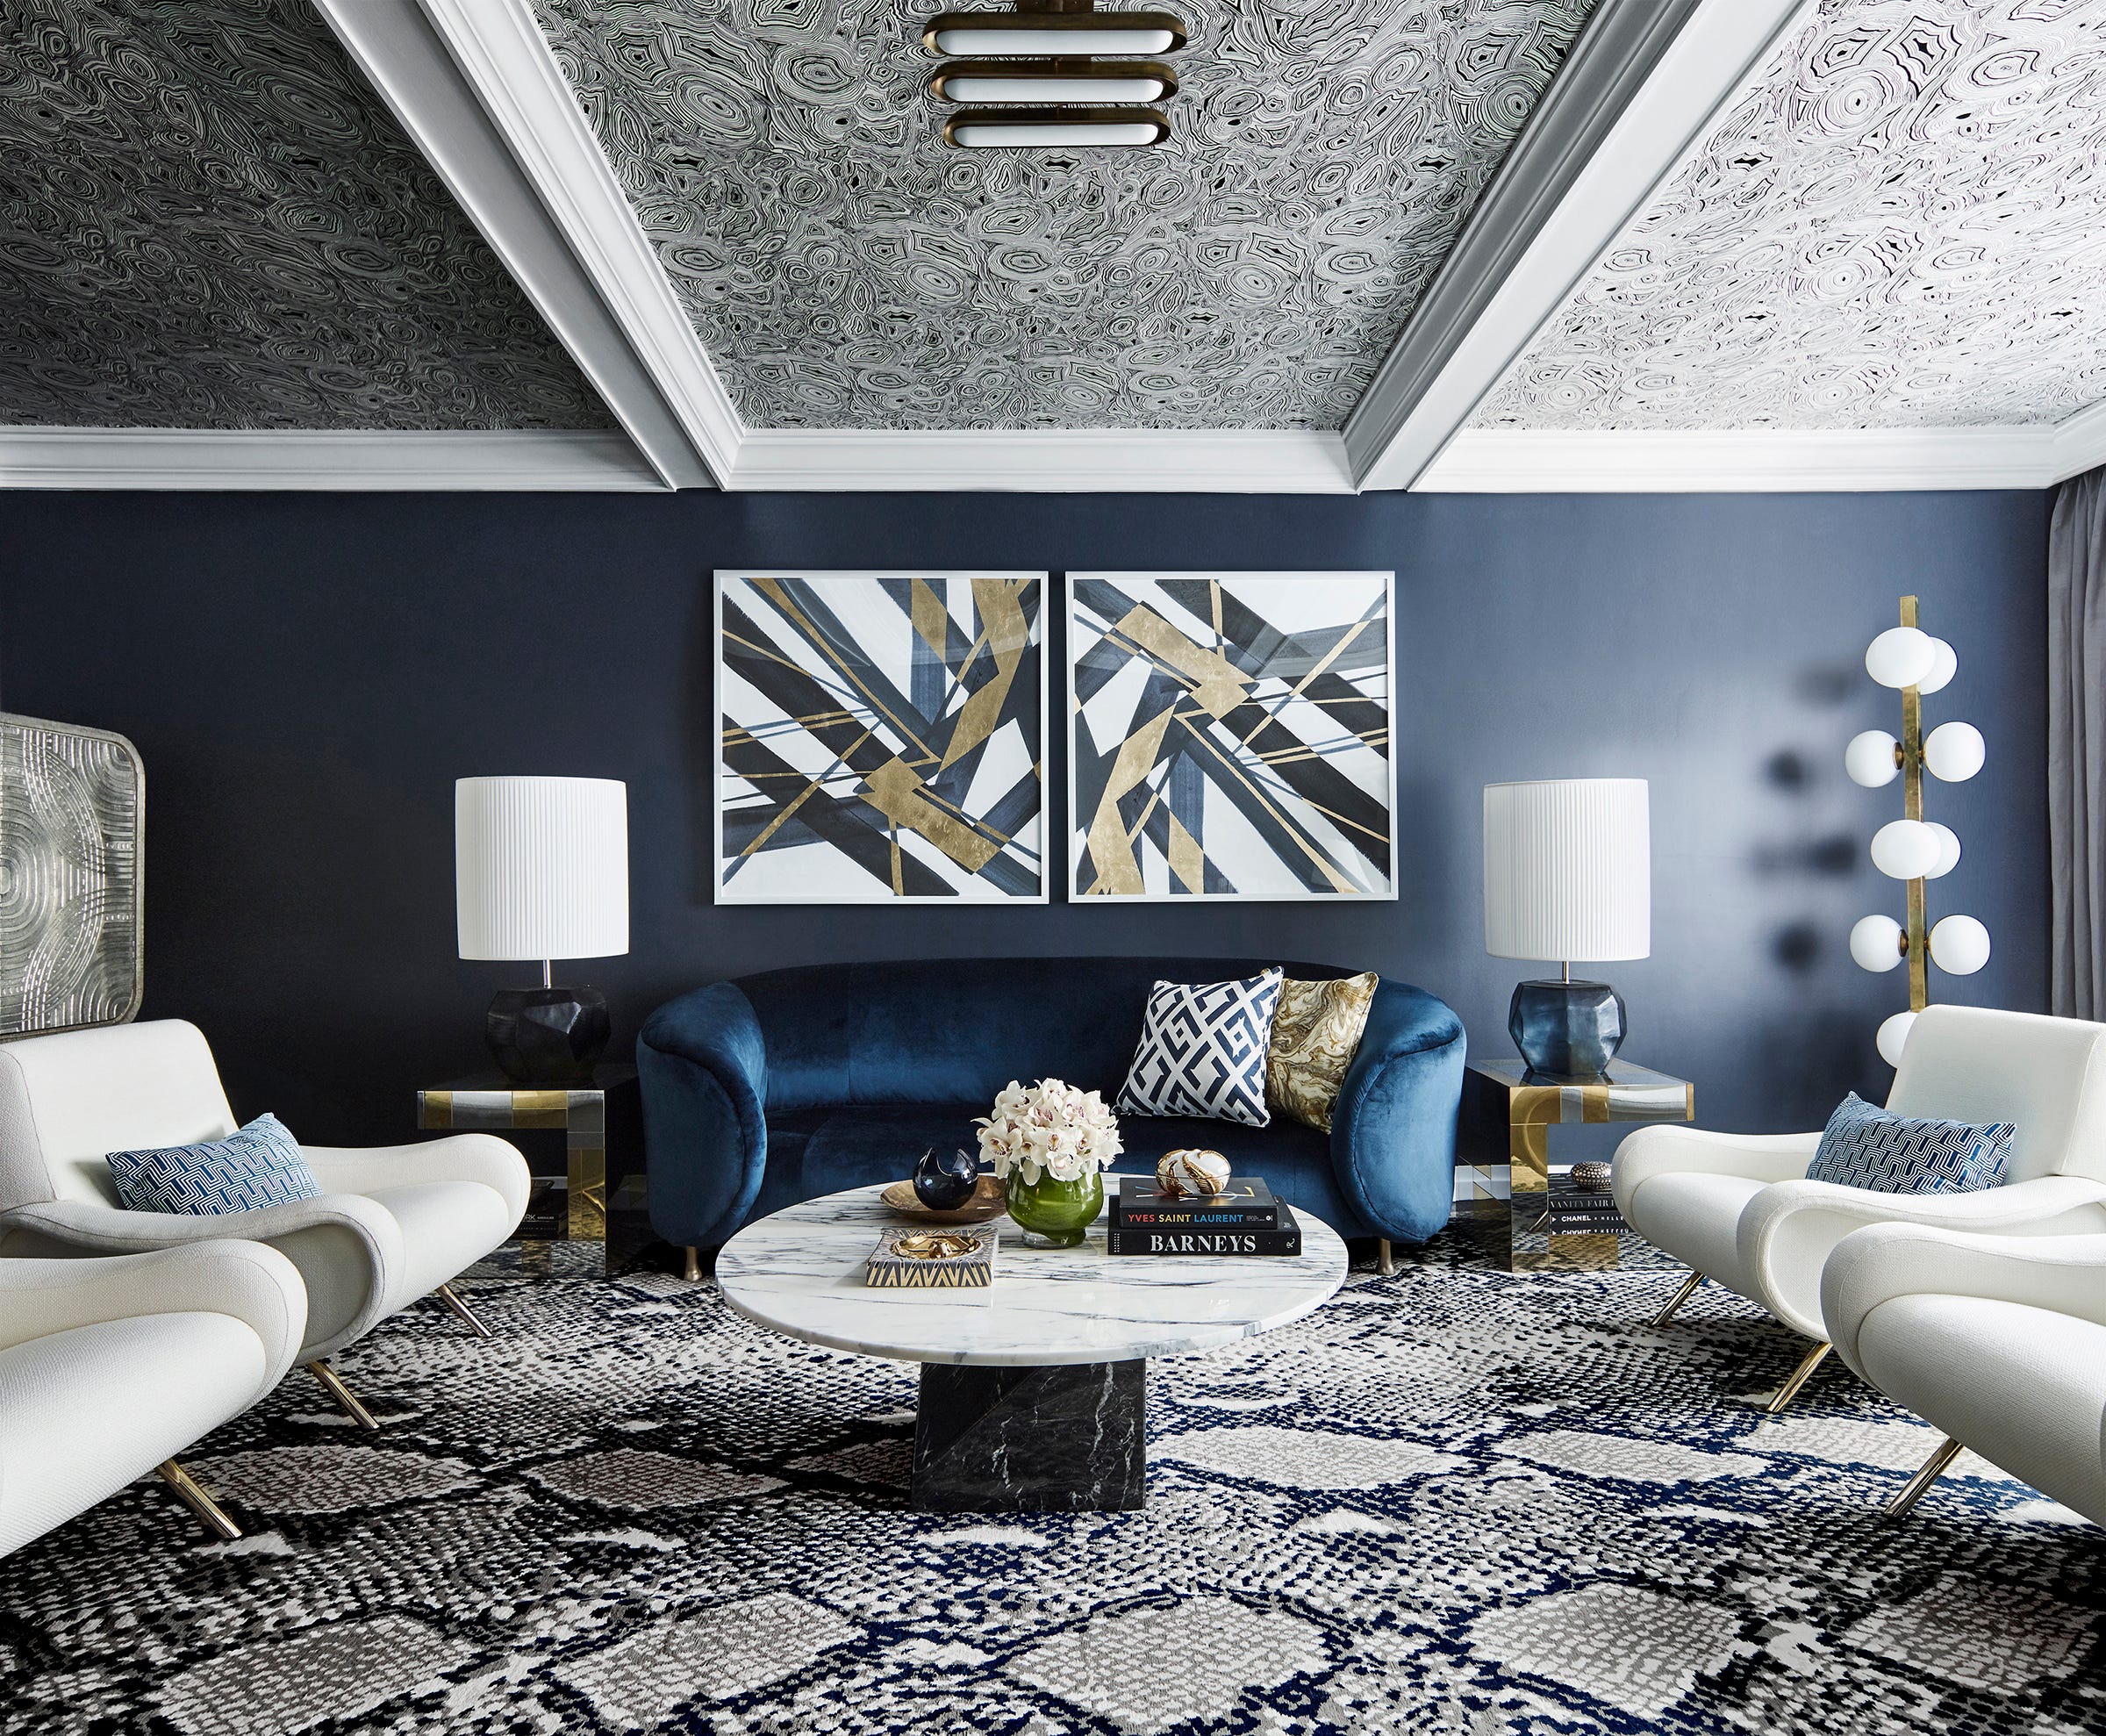 Low ceiling? Greg Natale's solution: Create a little drama. He first papered the tray ceiling in a swirling malachite pattern in black and white, painted the walls navy and furnished the space with a blue velvet sofa by Kelly Wearstler, paired with white Cassina chairs. The snakeskin rug by Diane von Furstenberg is genius. And the final touch: graphic prints with glint of gold.